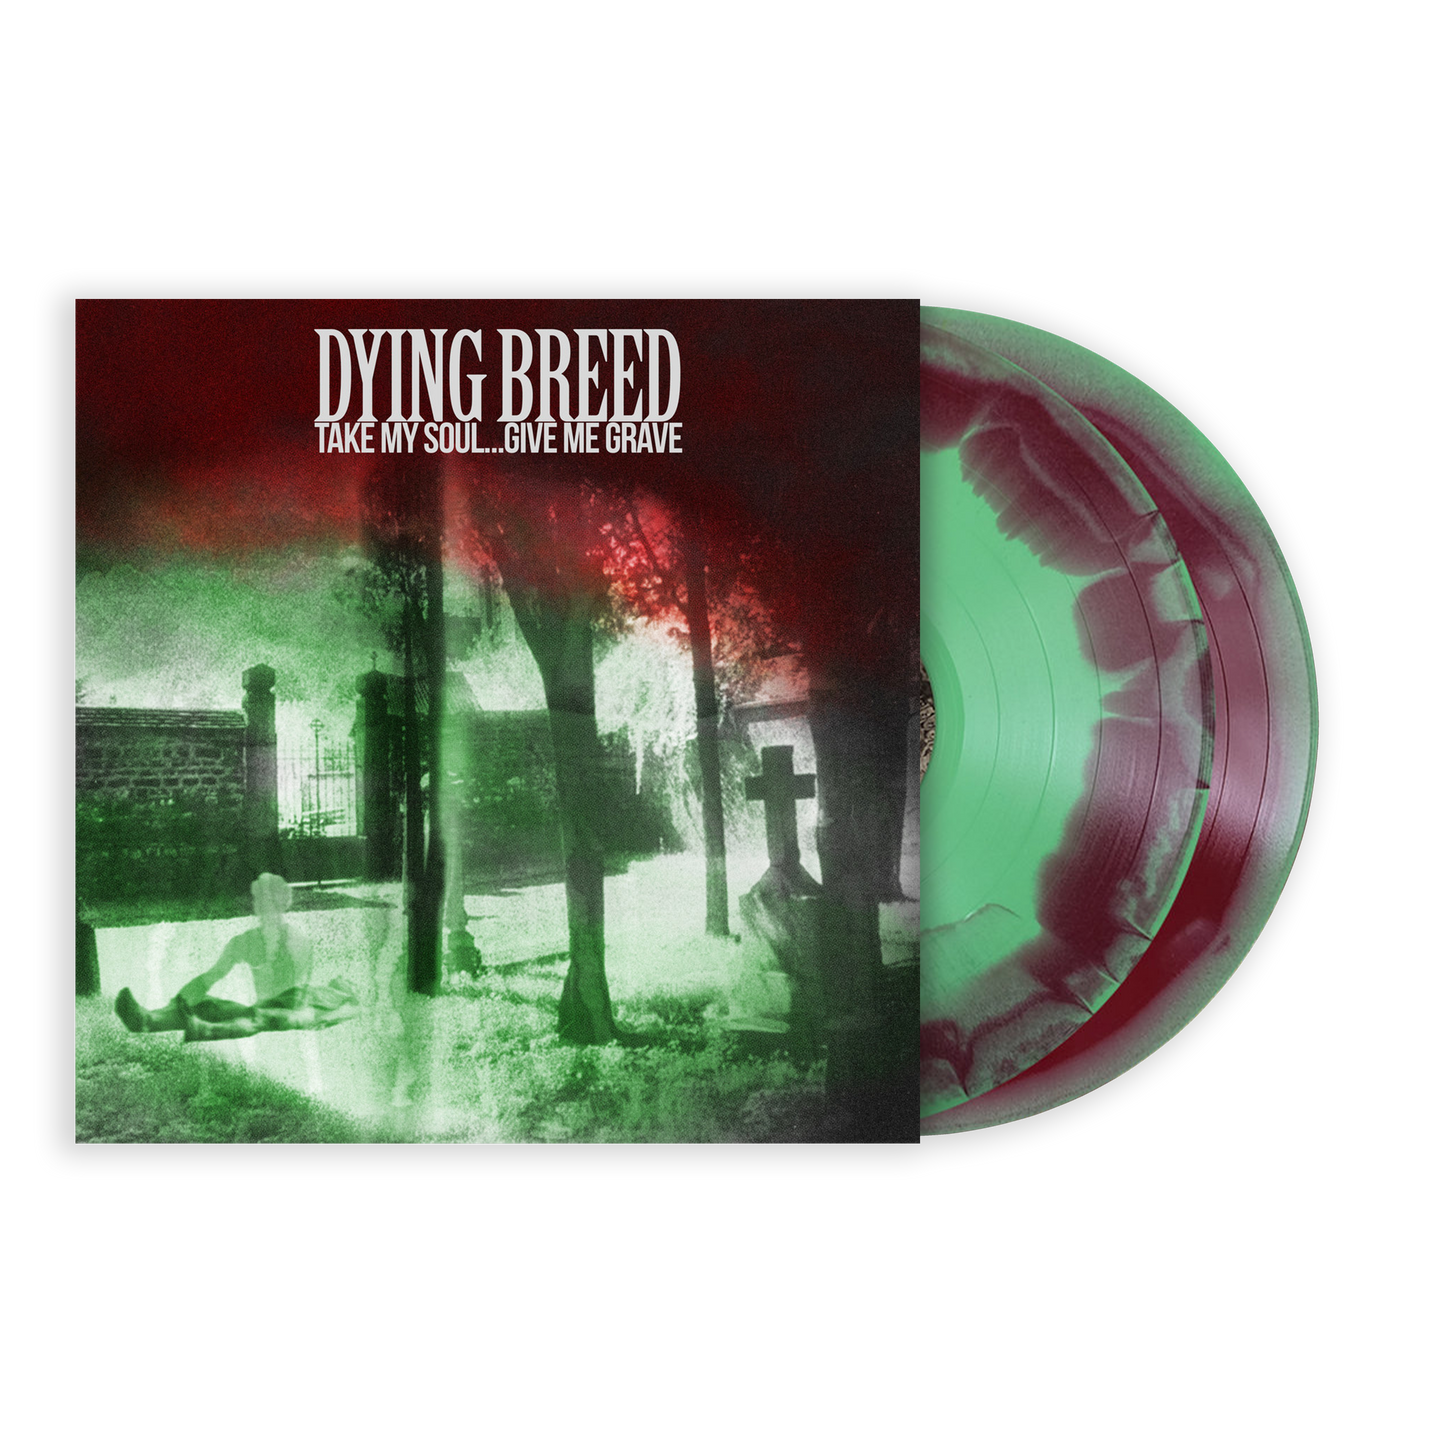 Dying Breed "Take My Soul...Give Me Grave" 2xLP